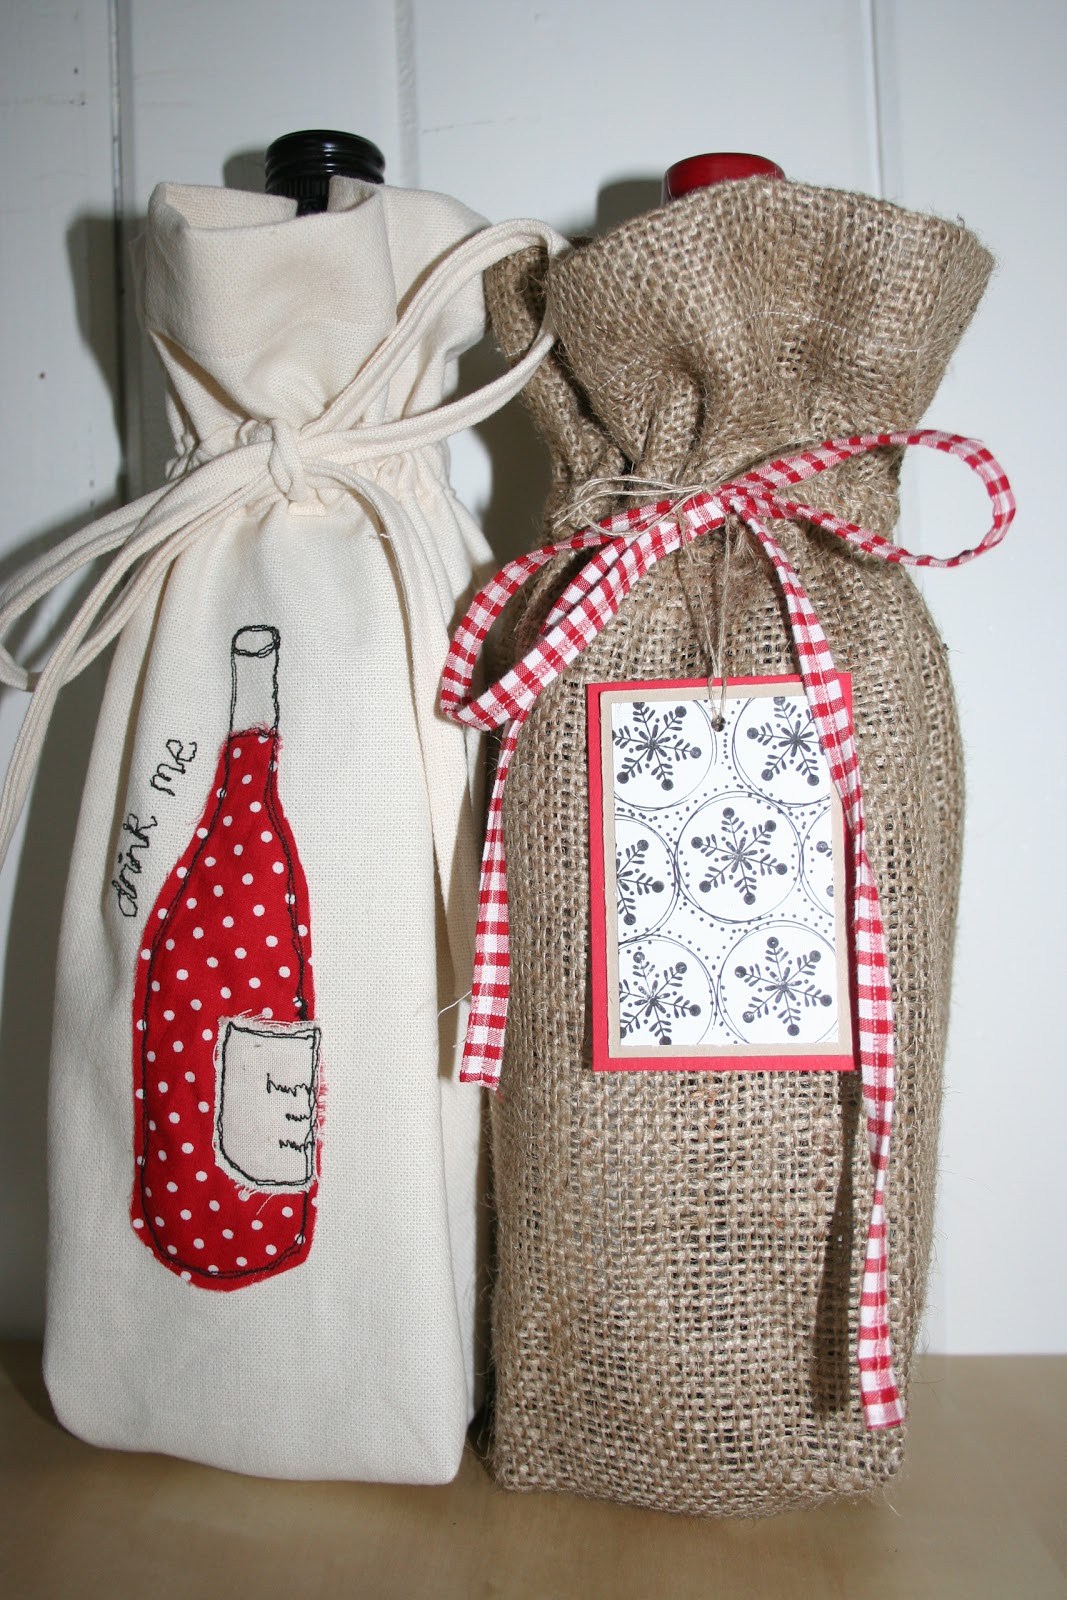 bubbly-bags-sewing-pattern-wine-bag-pattern-wine-bottle-gift-bag-my